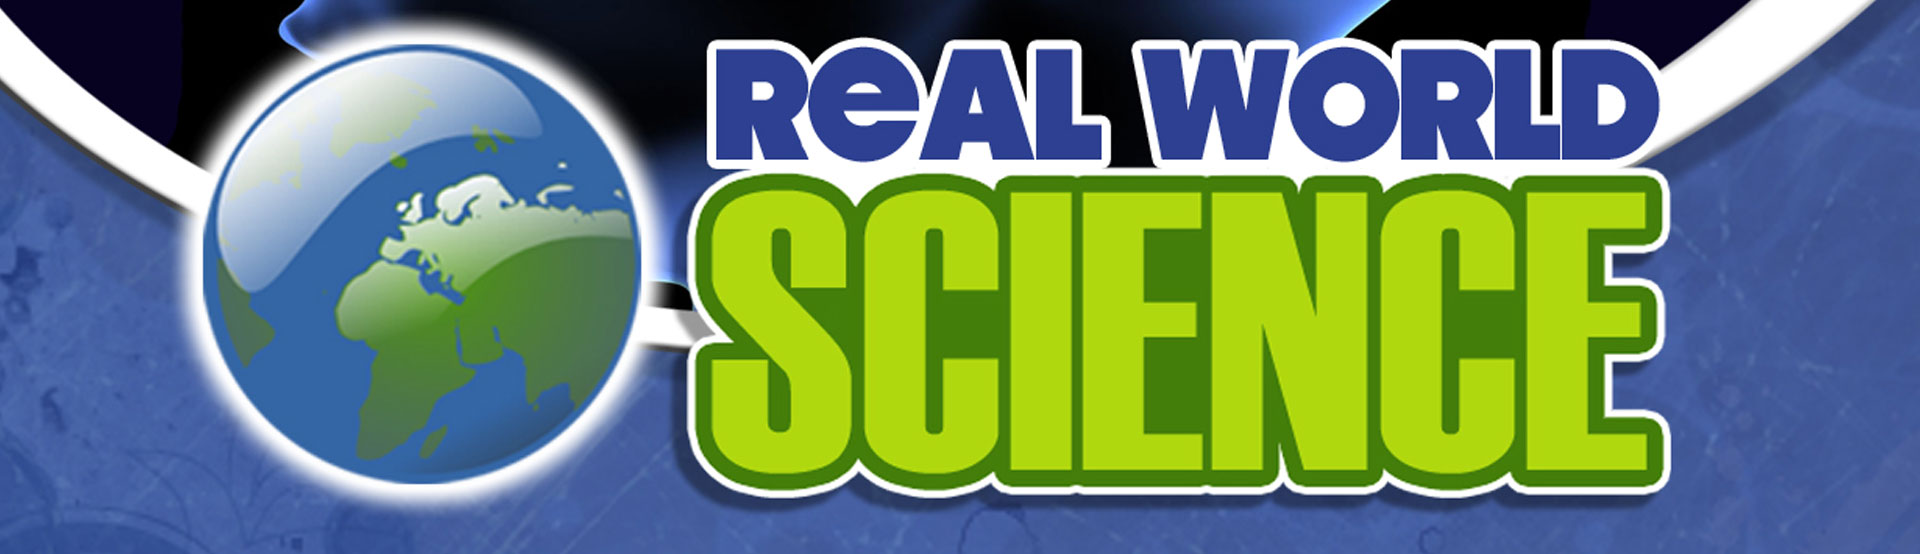 Real World Science